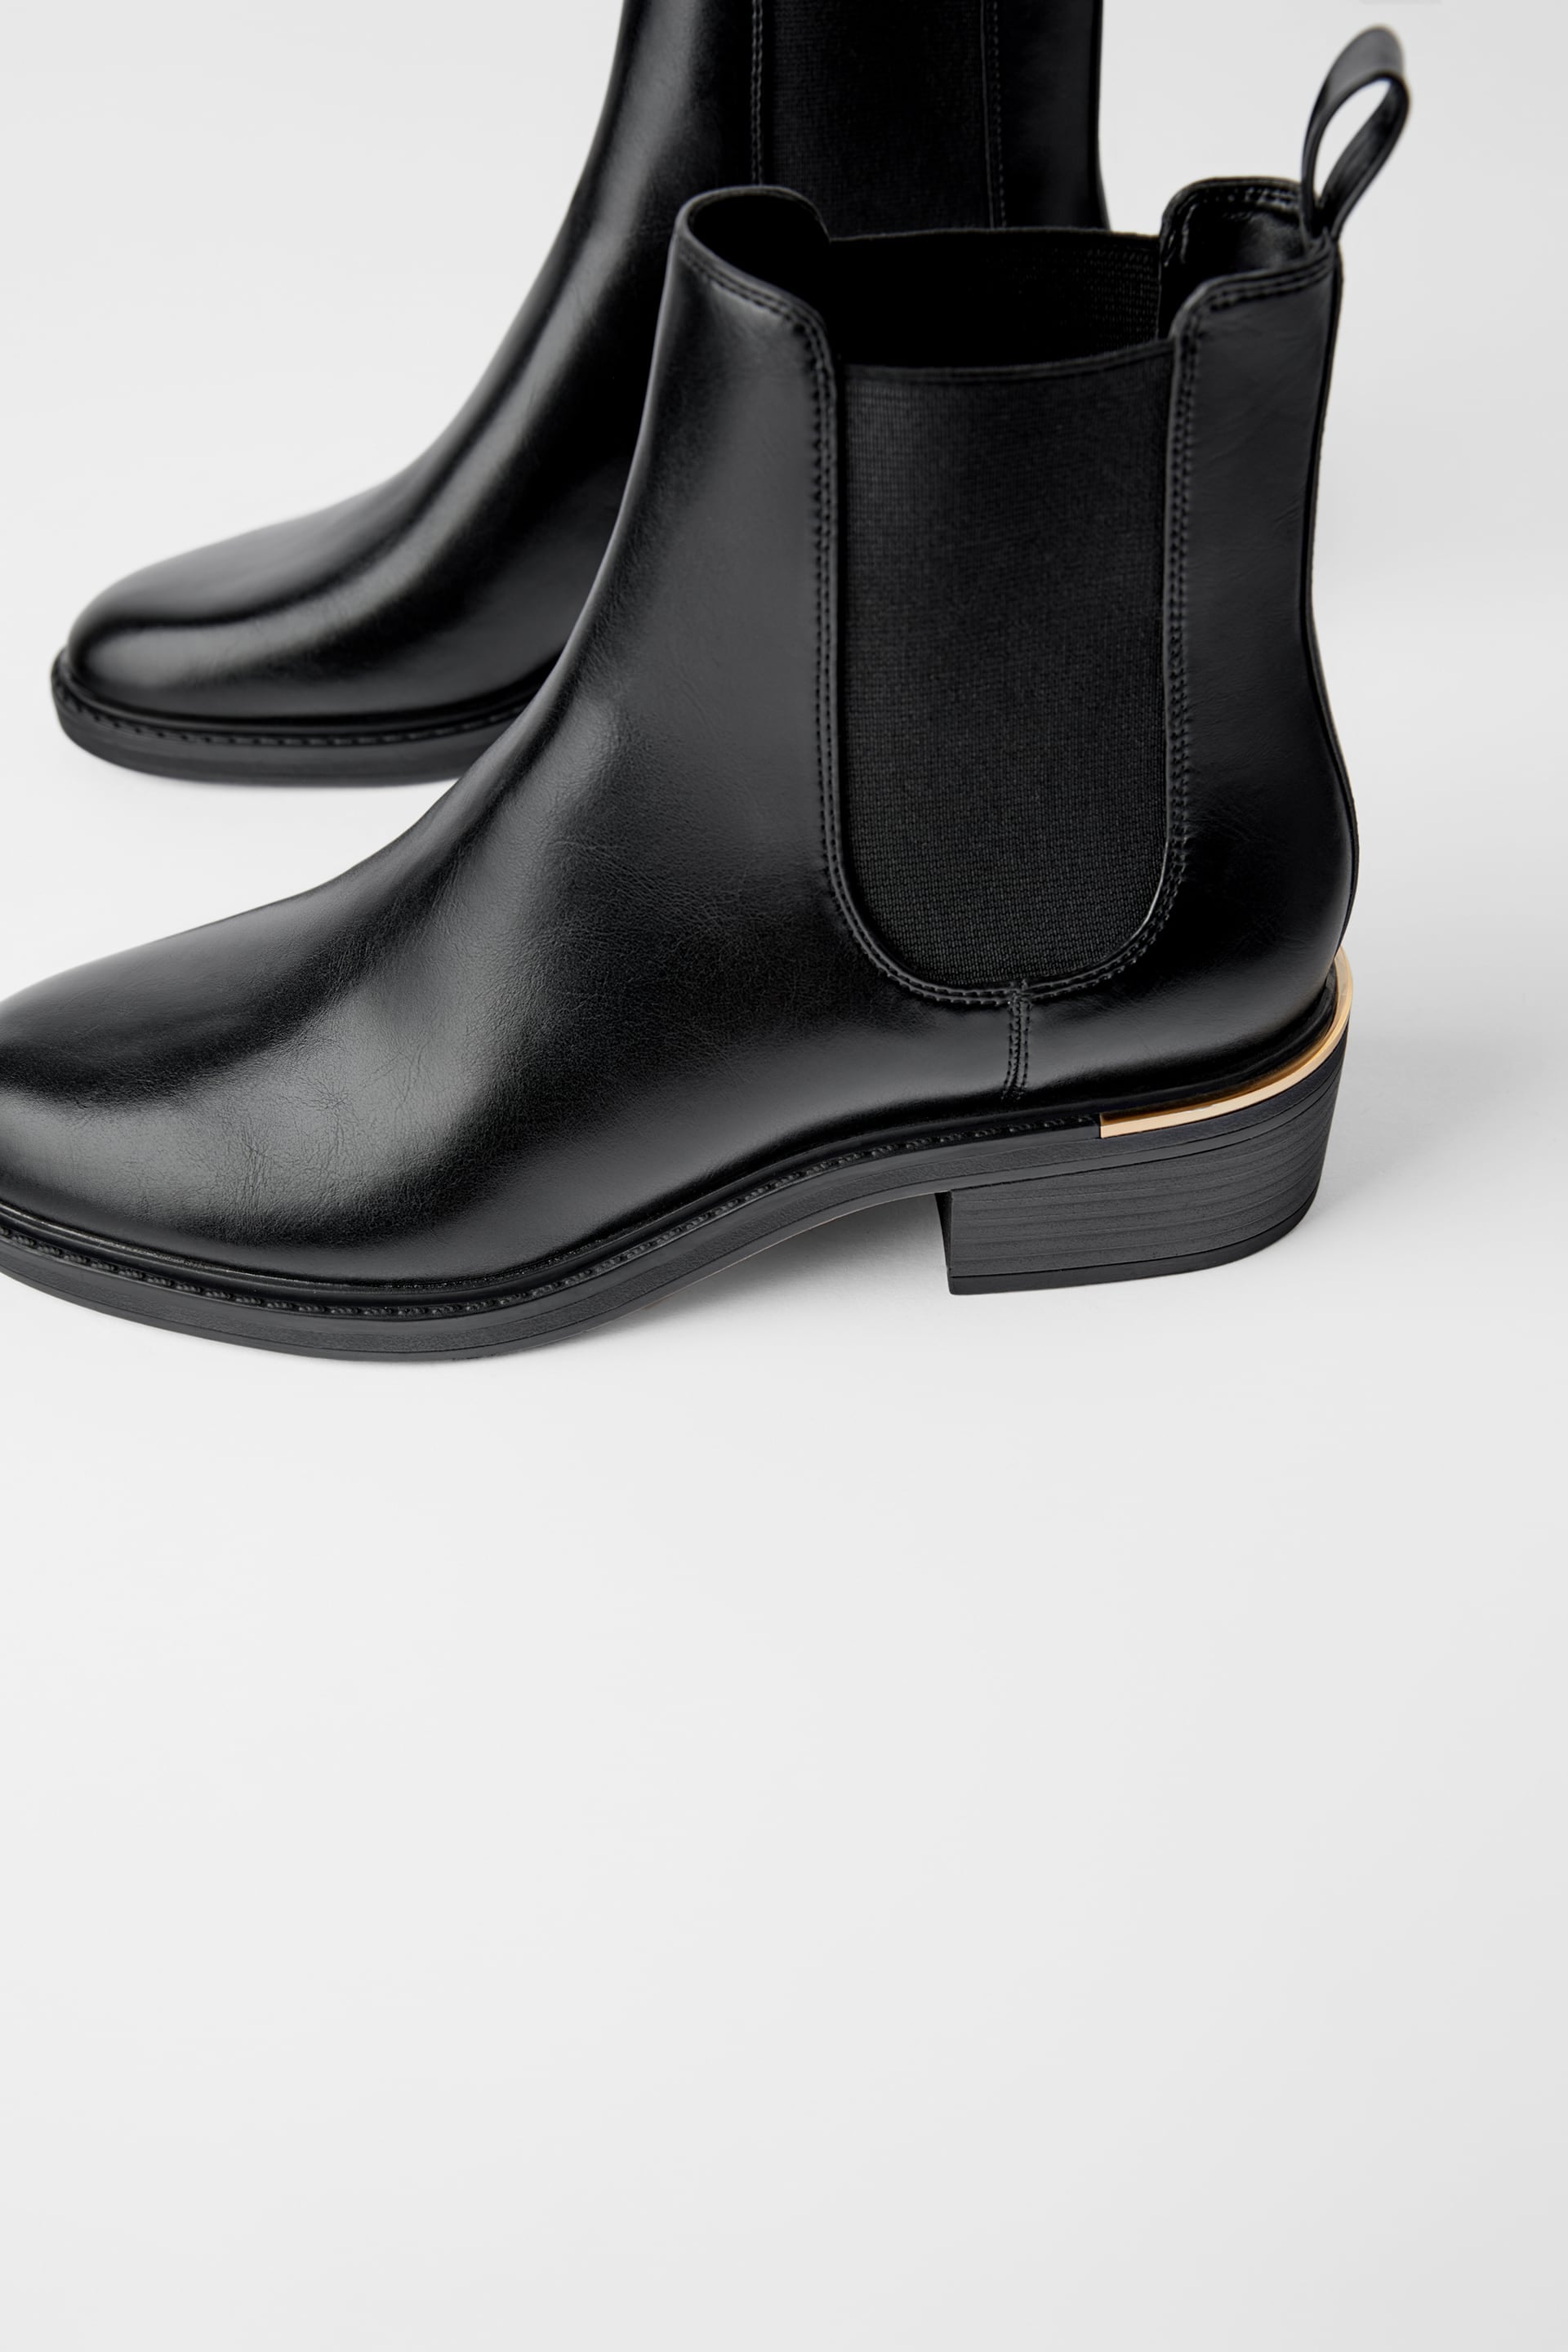 zara ankle shoes